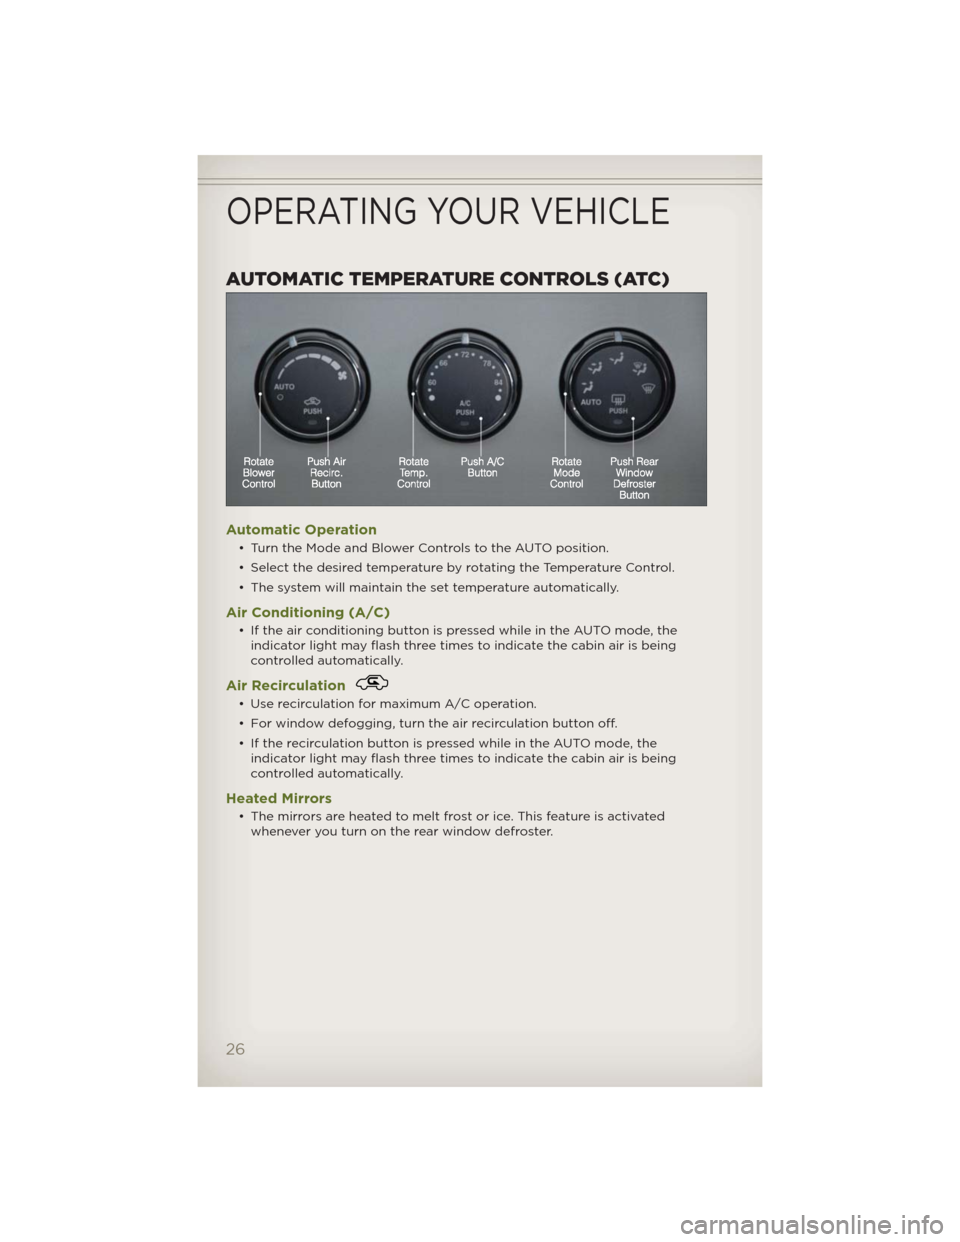 JEEP WRANGLER 2012 JK / 3.G User Guide AUTOMATIC TEMPERATURE CONTROLS (ATC)
Automatic Operation
• Turn the Mode and Blower Controls to the AUTO position.
• Select the desired temperature by rotating the Temperature Control.
• The sys